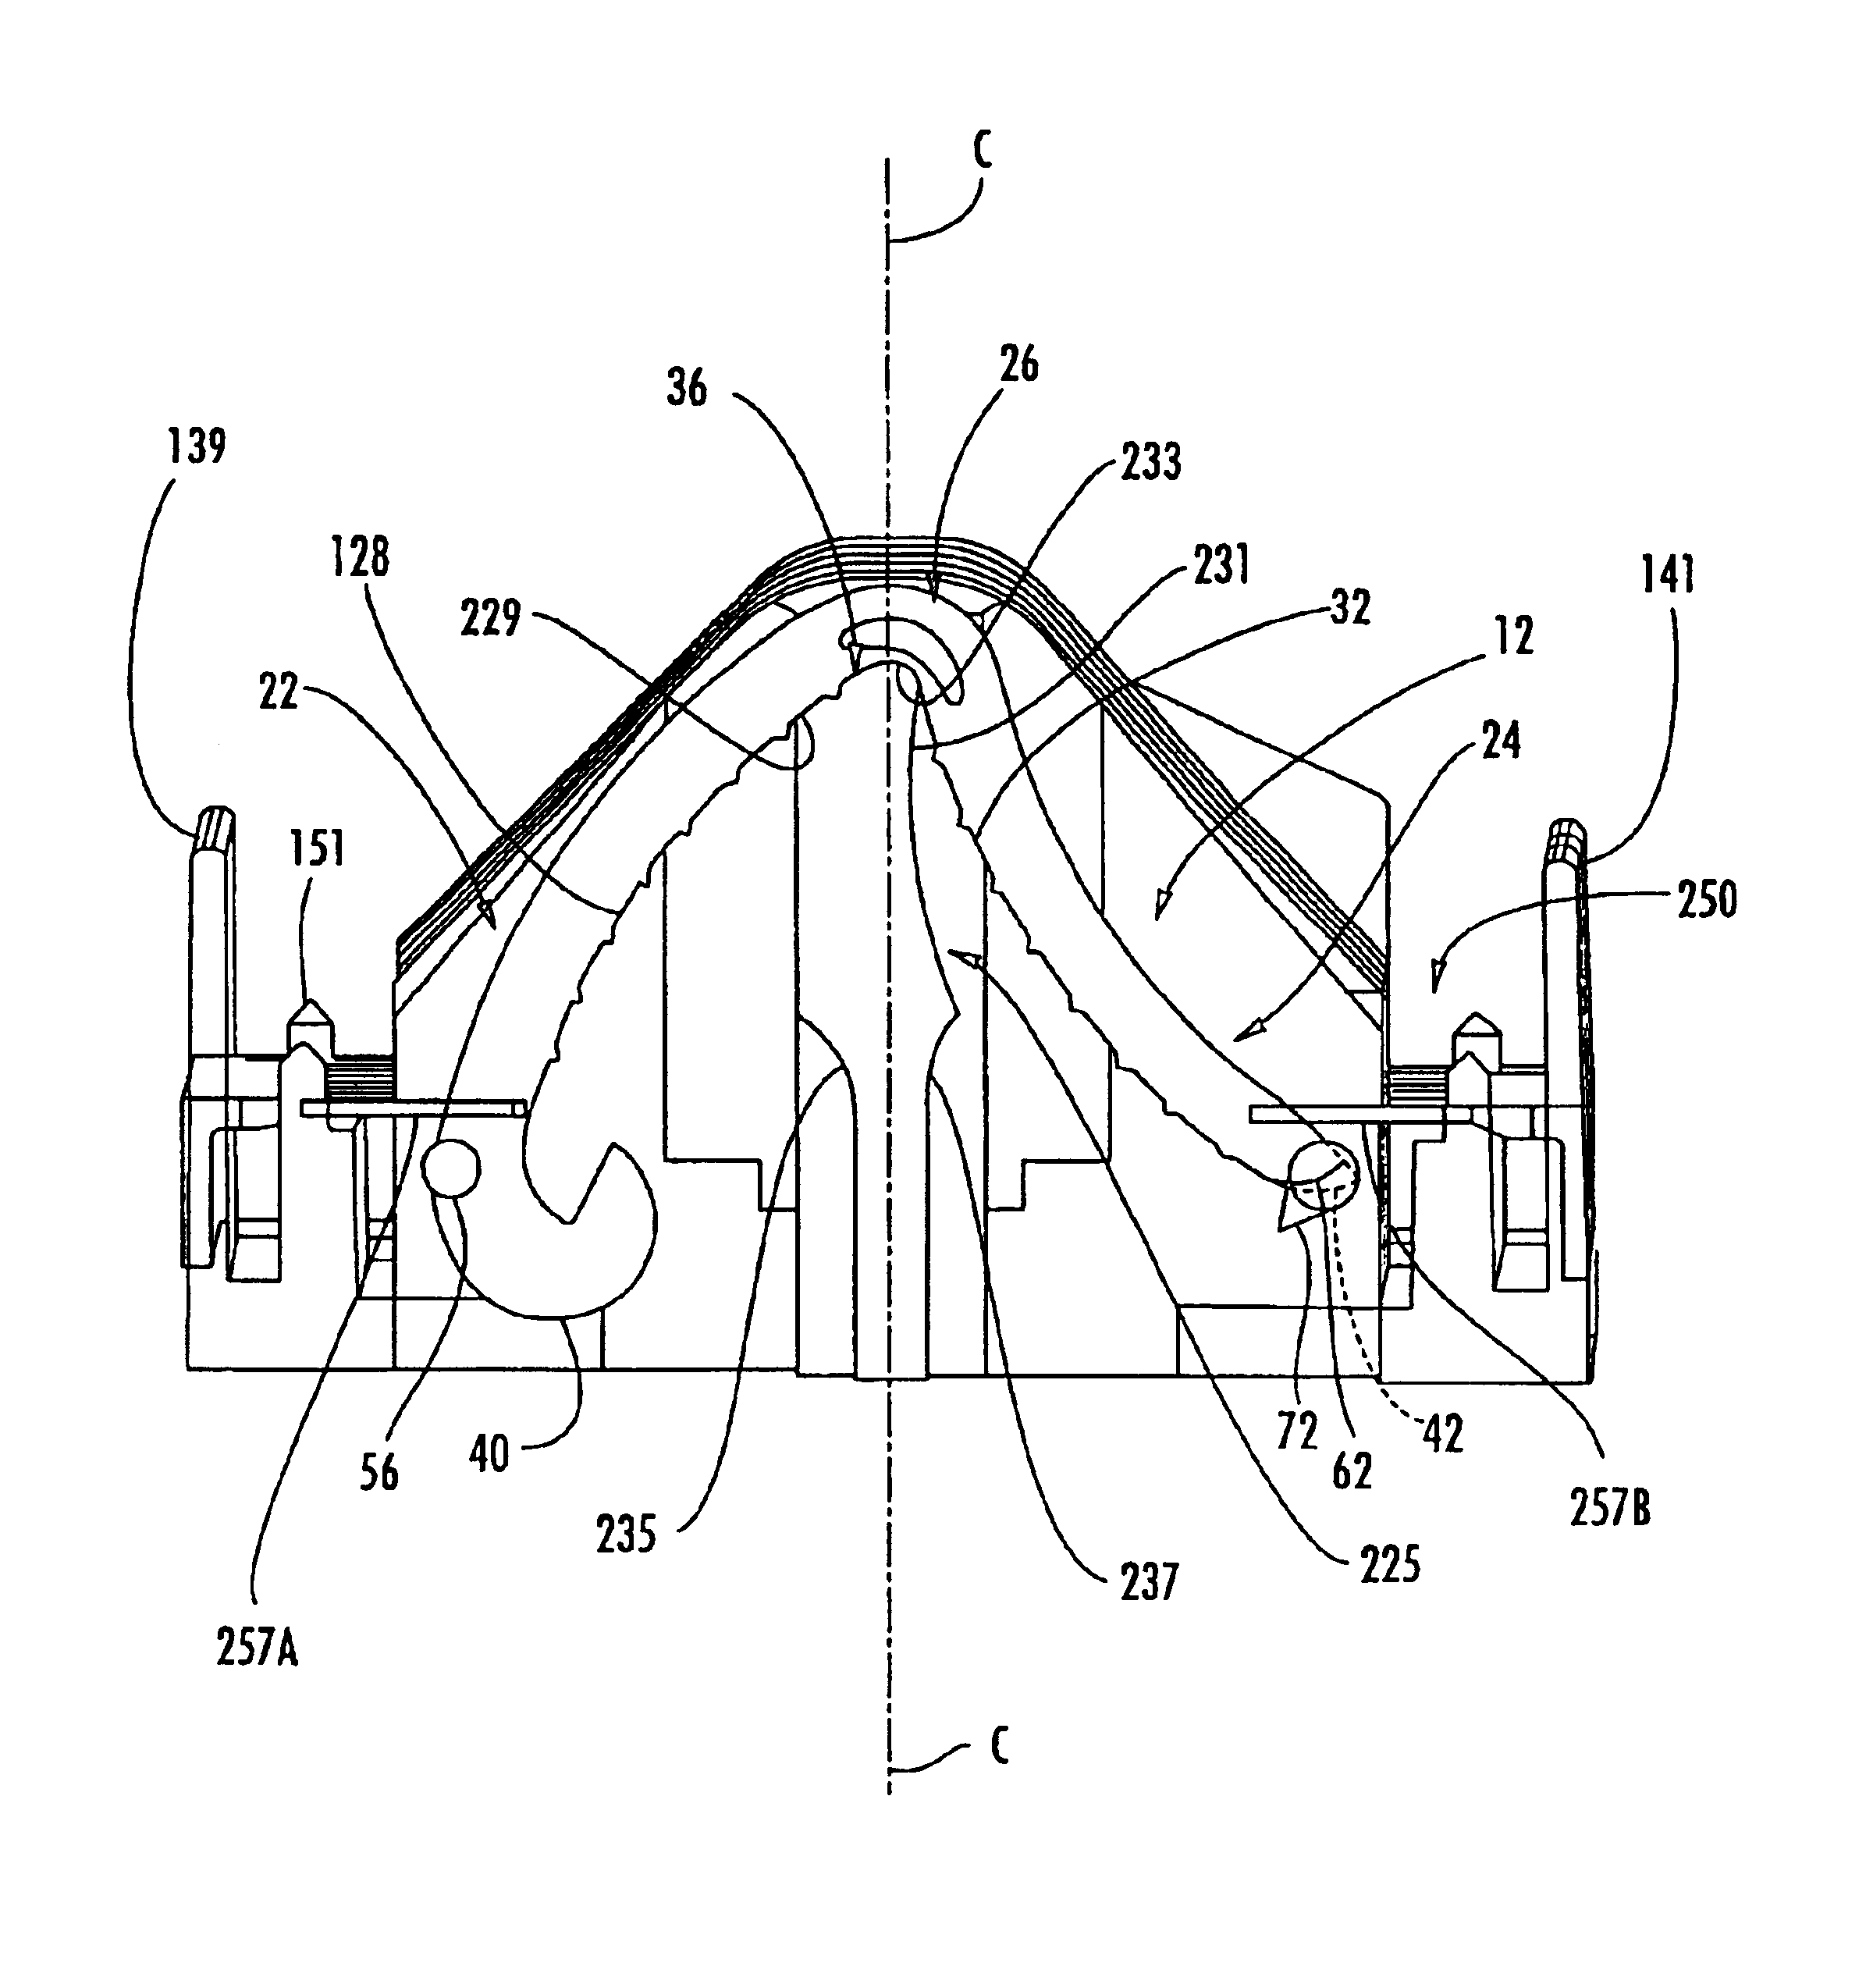 Cartridge for holding asymmetric surgical clips